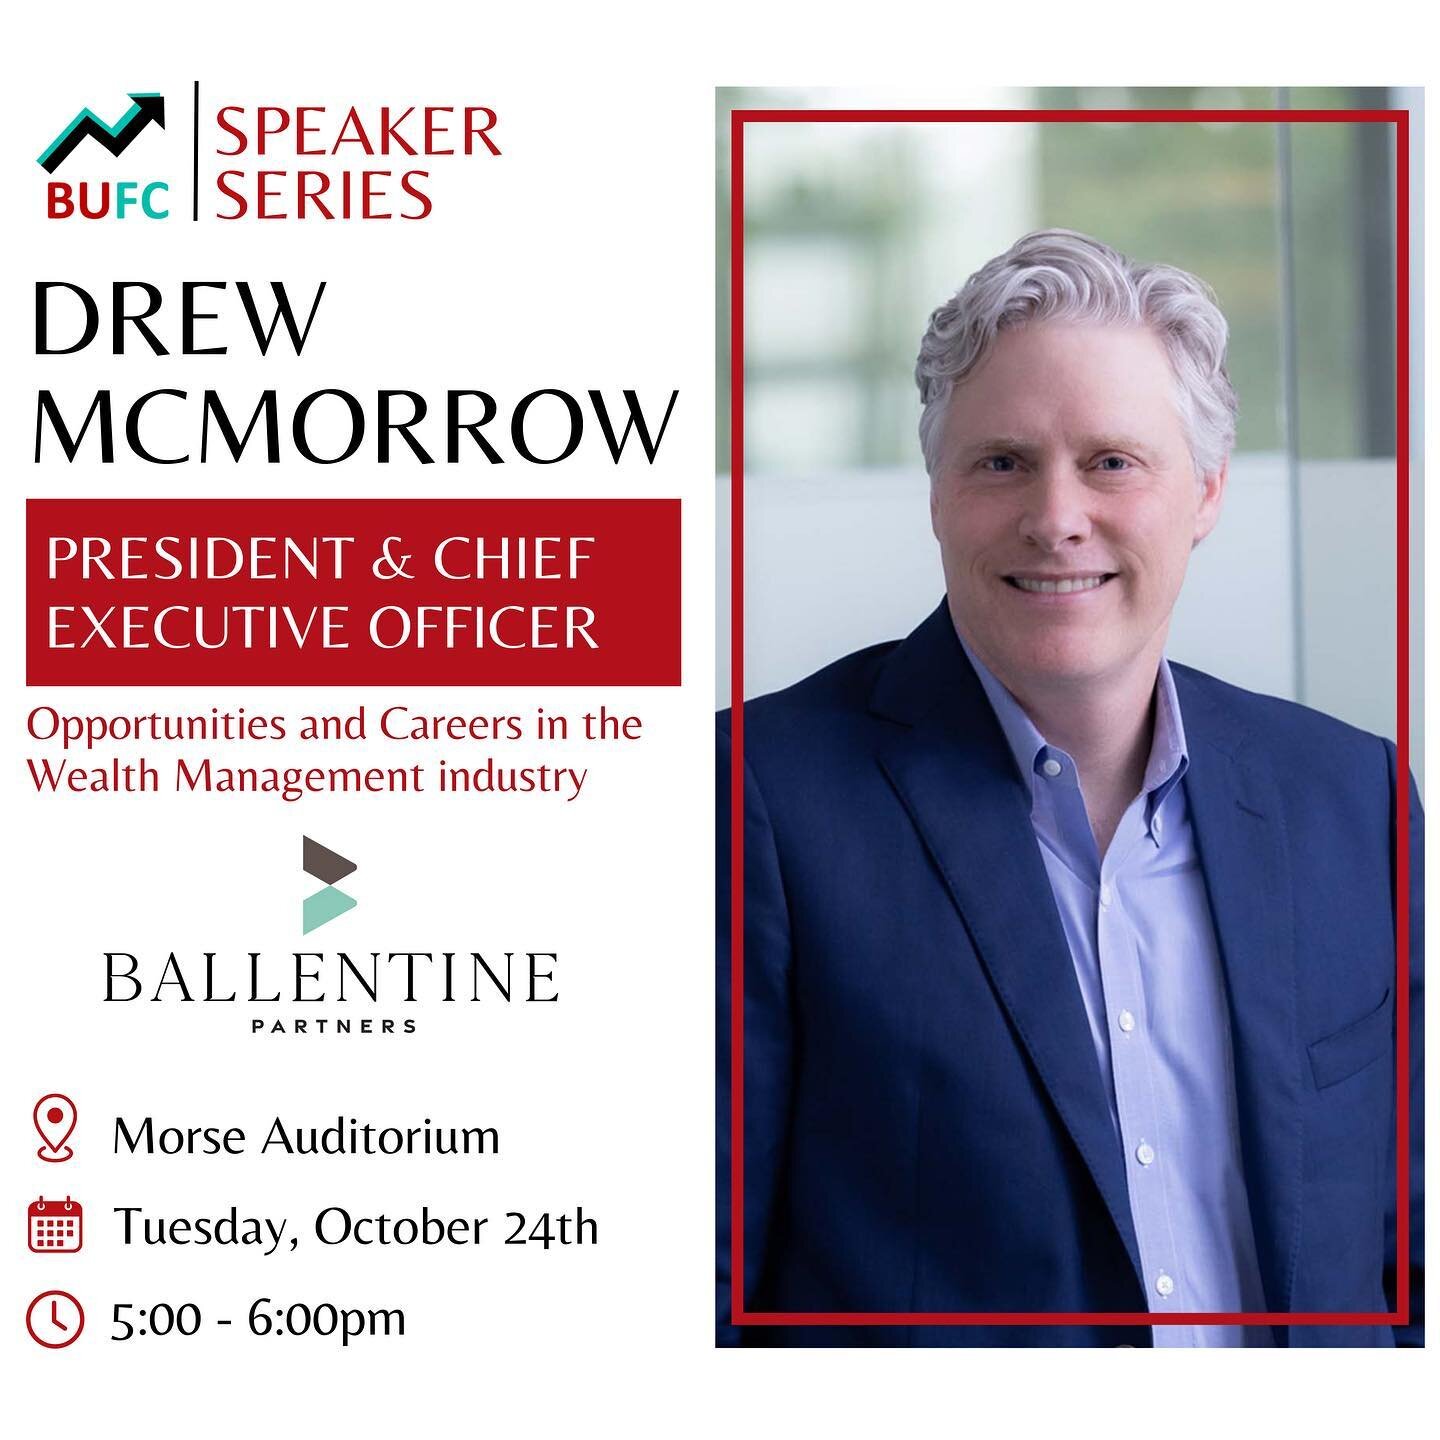 Sign up through the link in our bio to hear Drew McMorrow on Tuesday, October 24th, at 5 pm in Morse Auditorium!